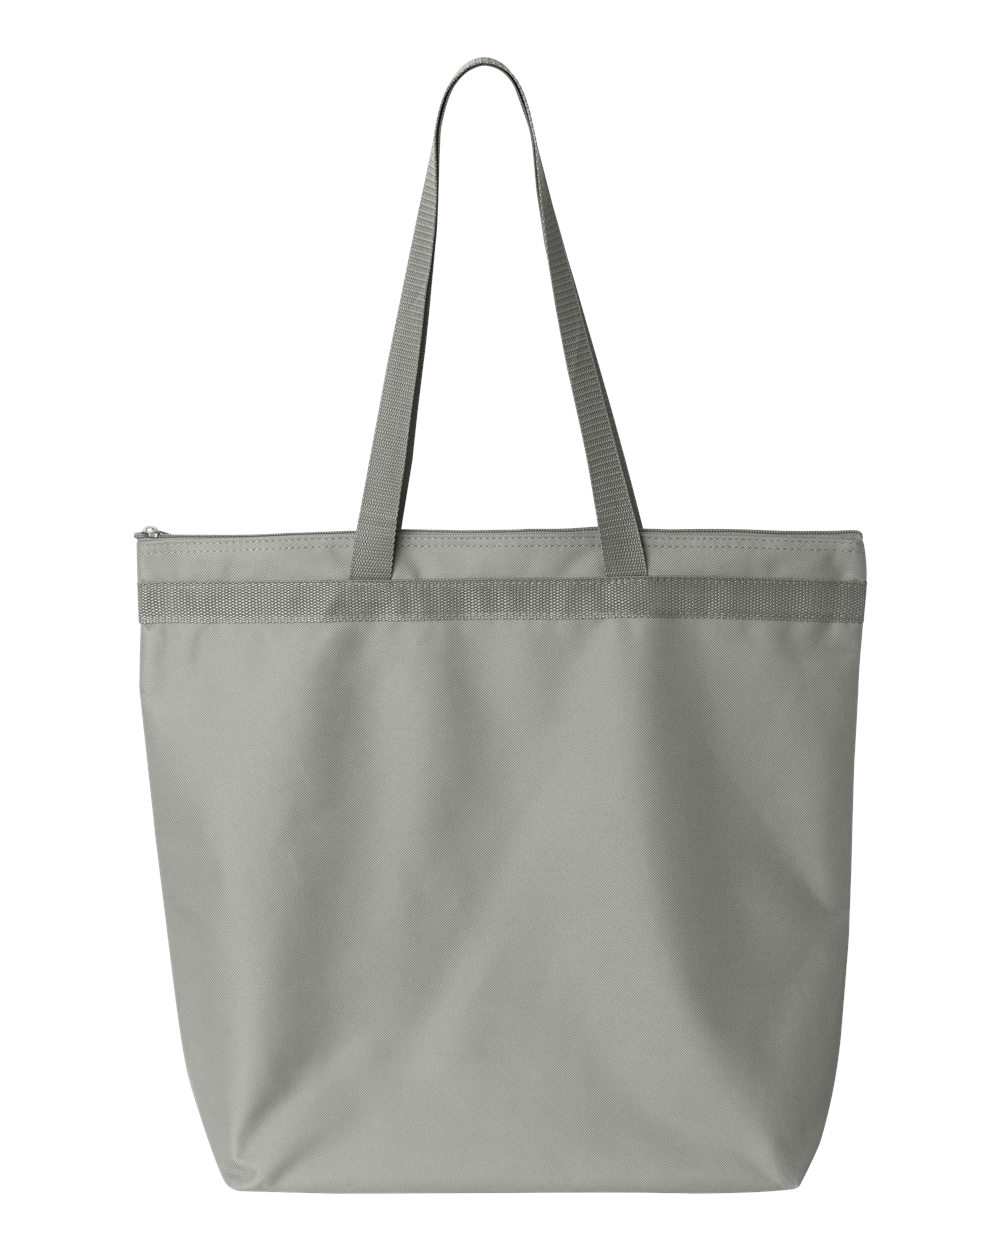 UltraClub 8802-Zippered Tote $5.15 - Bags